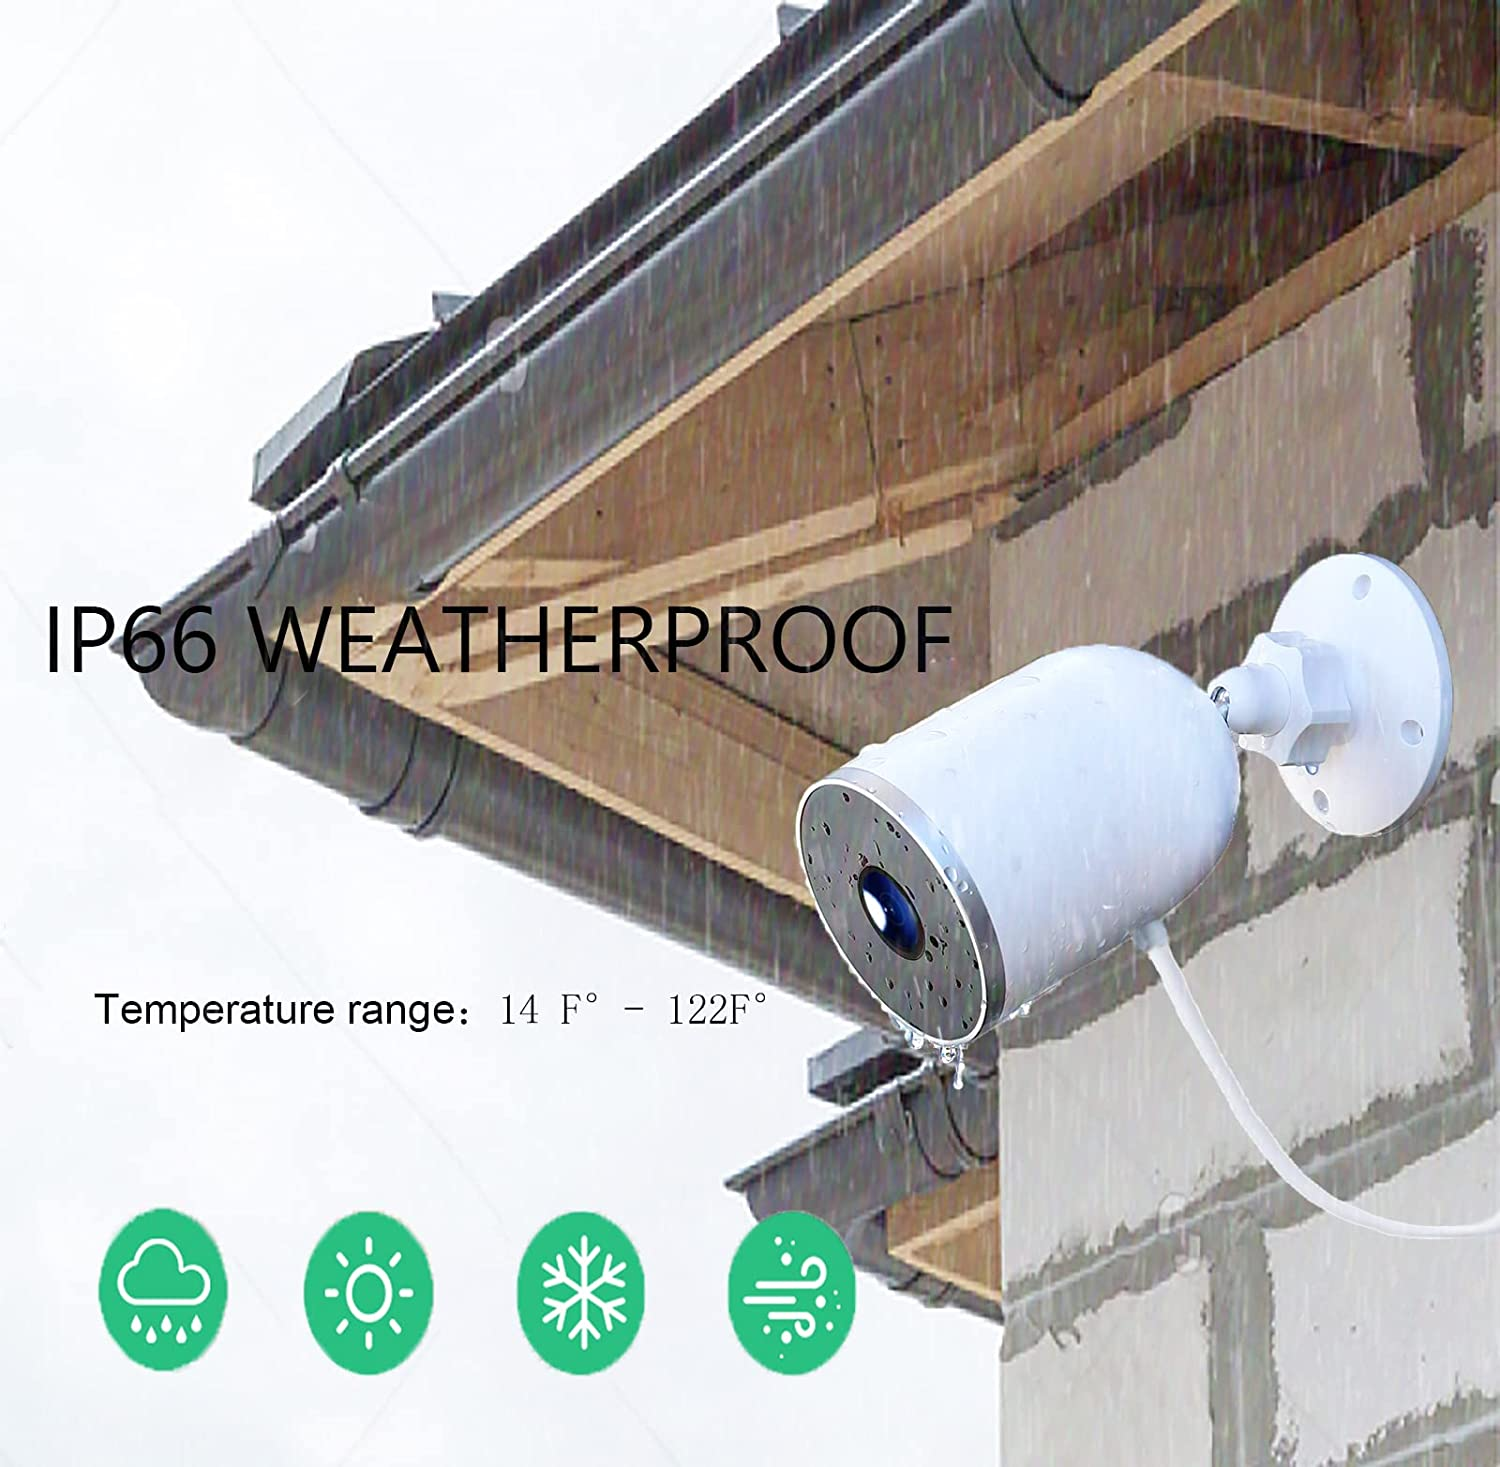 1080P HD WiFi Security Camera Outdoor with 103° Wide-Angle Infrared Night Vision, Wireless Motion Detection, Two-Way Communication, Waterproof IP66, SD Card and Cloud Storage